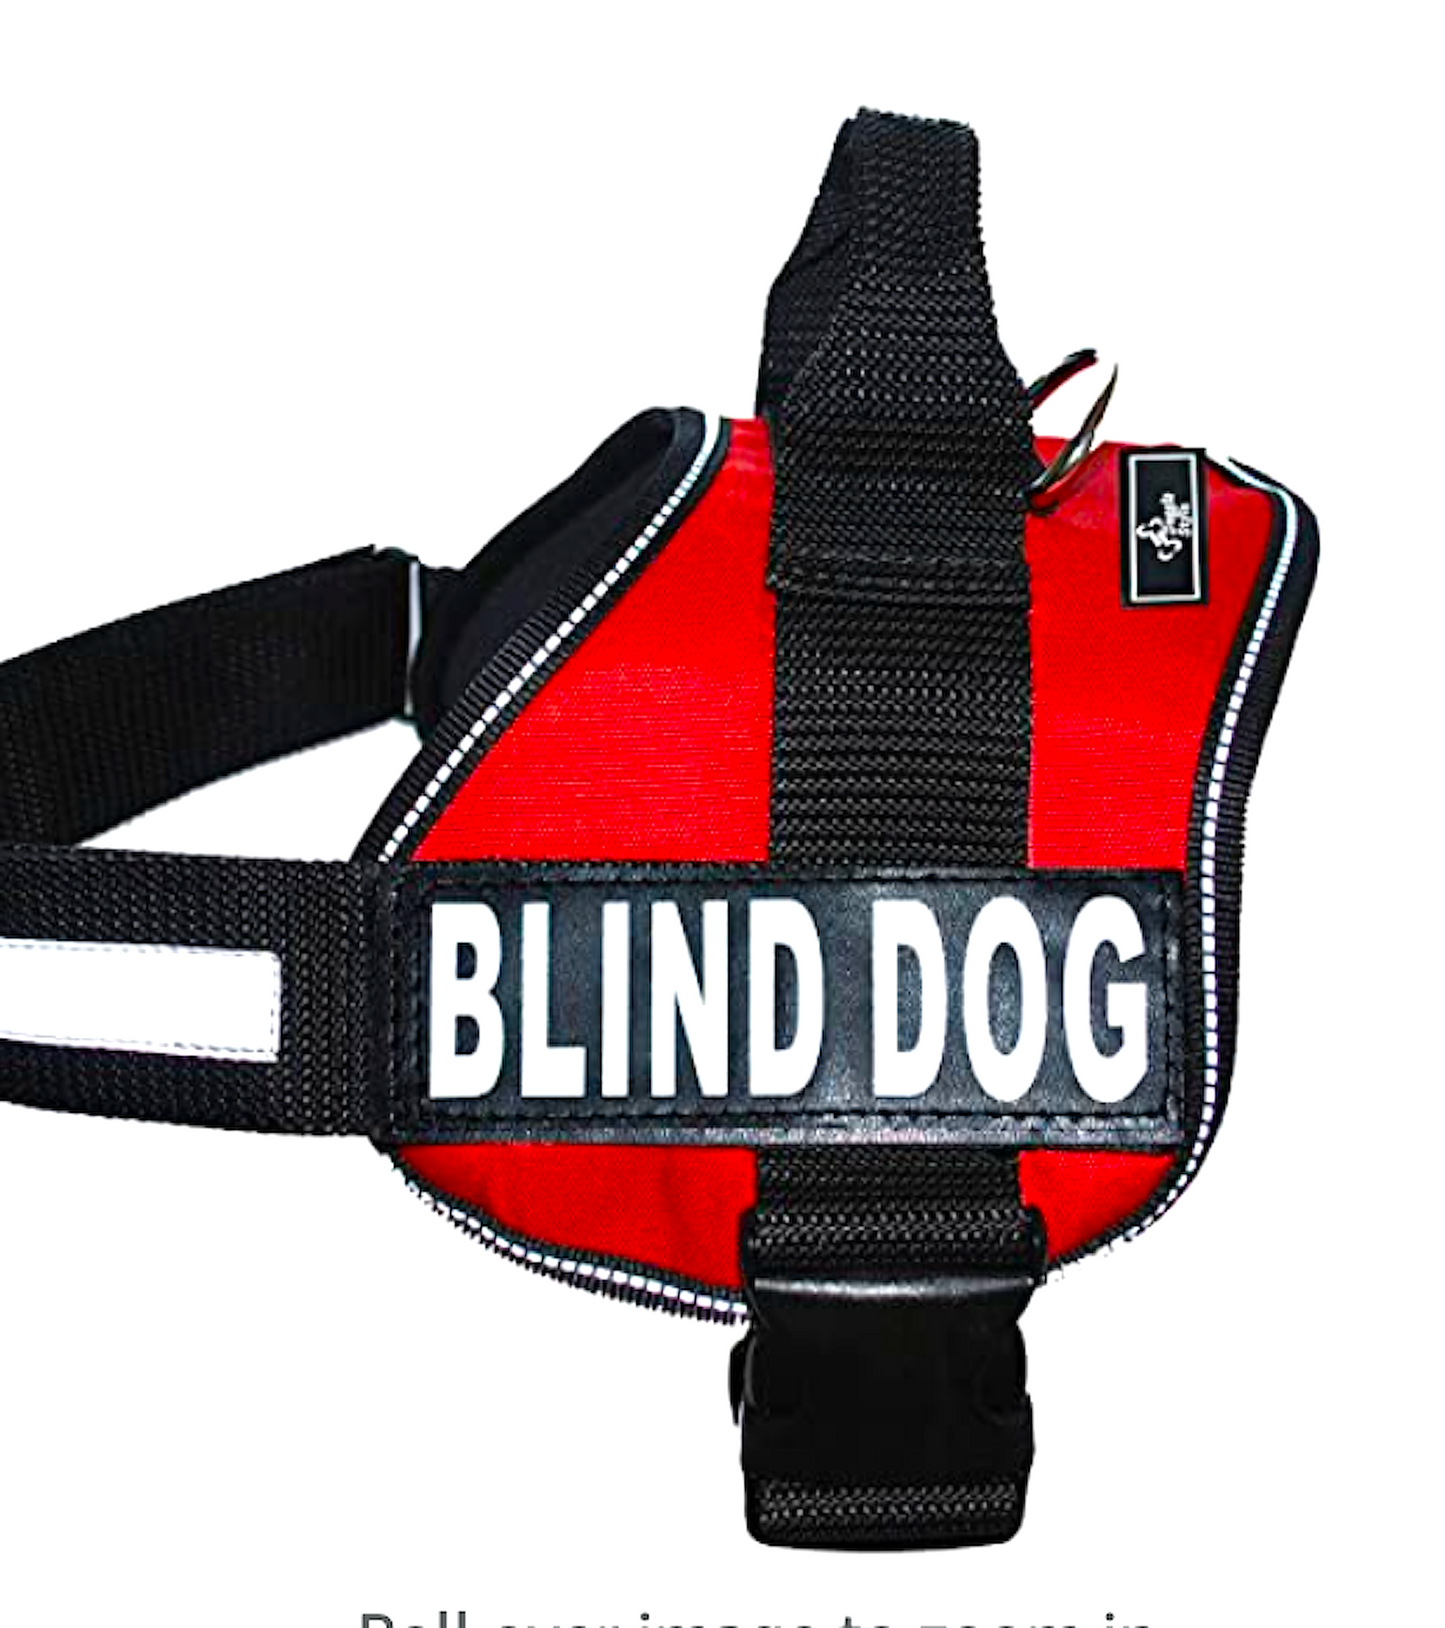 HARNESS FOR BLIND DOGS: let others know that your dog needs special consideration